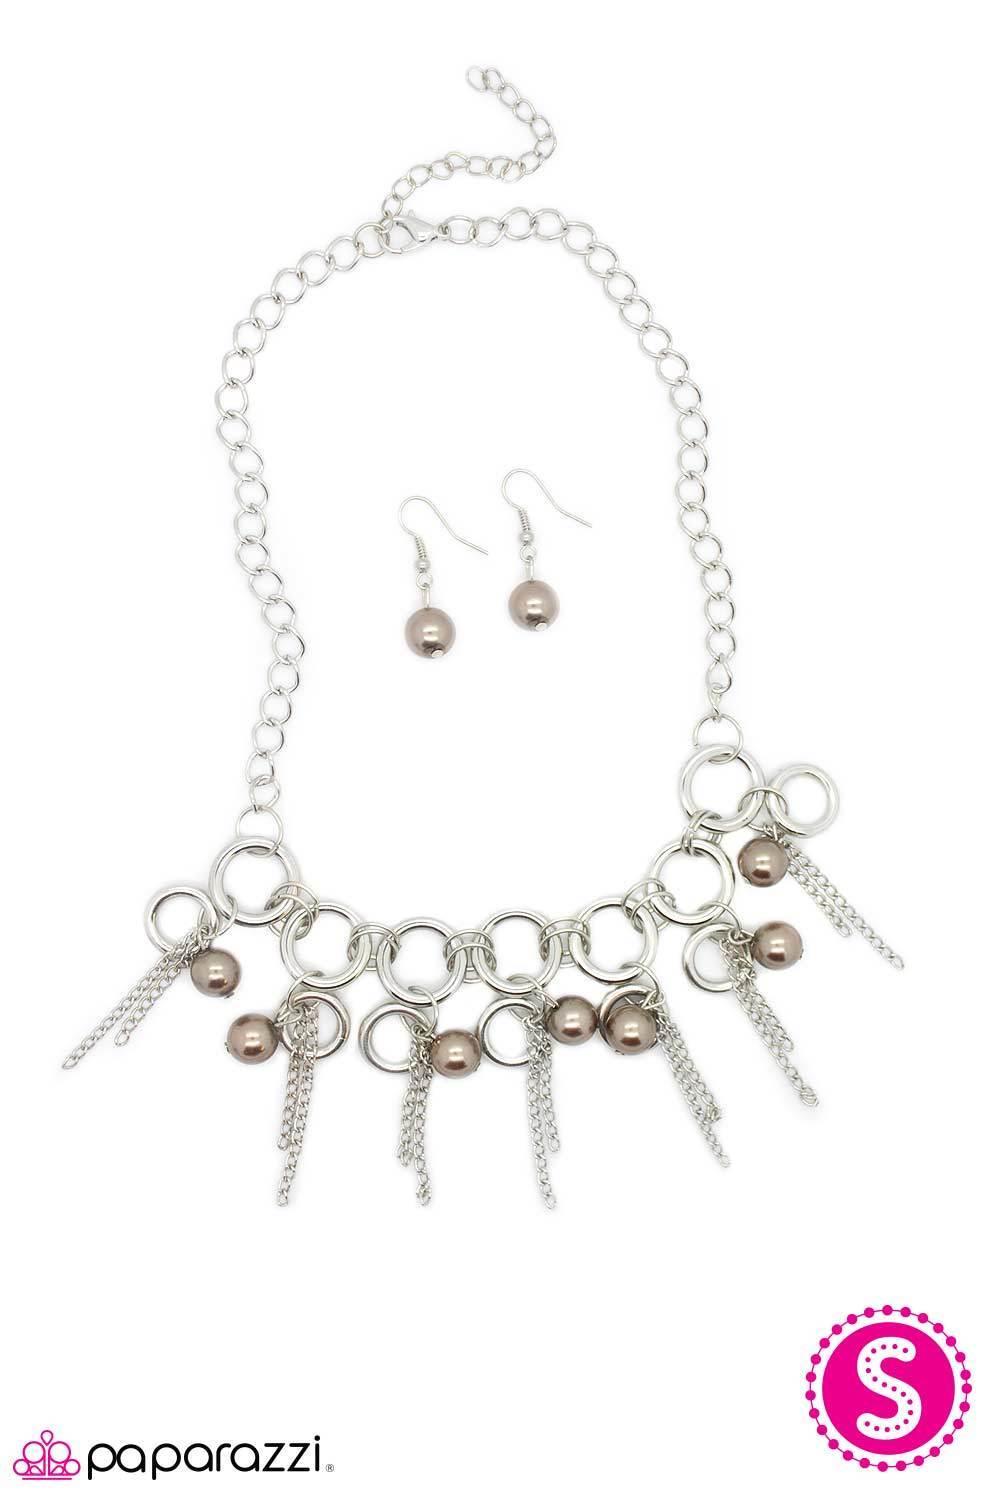 Lightly Tassled Silver and Brown Pearl Necklace - Paparazzi Accessories-CarasShop.com - $5 Jewelry by Cara Jewels